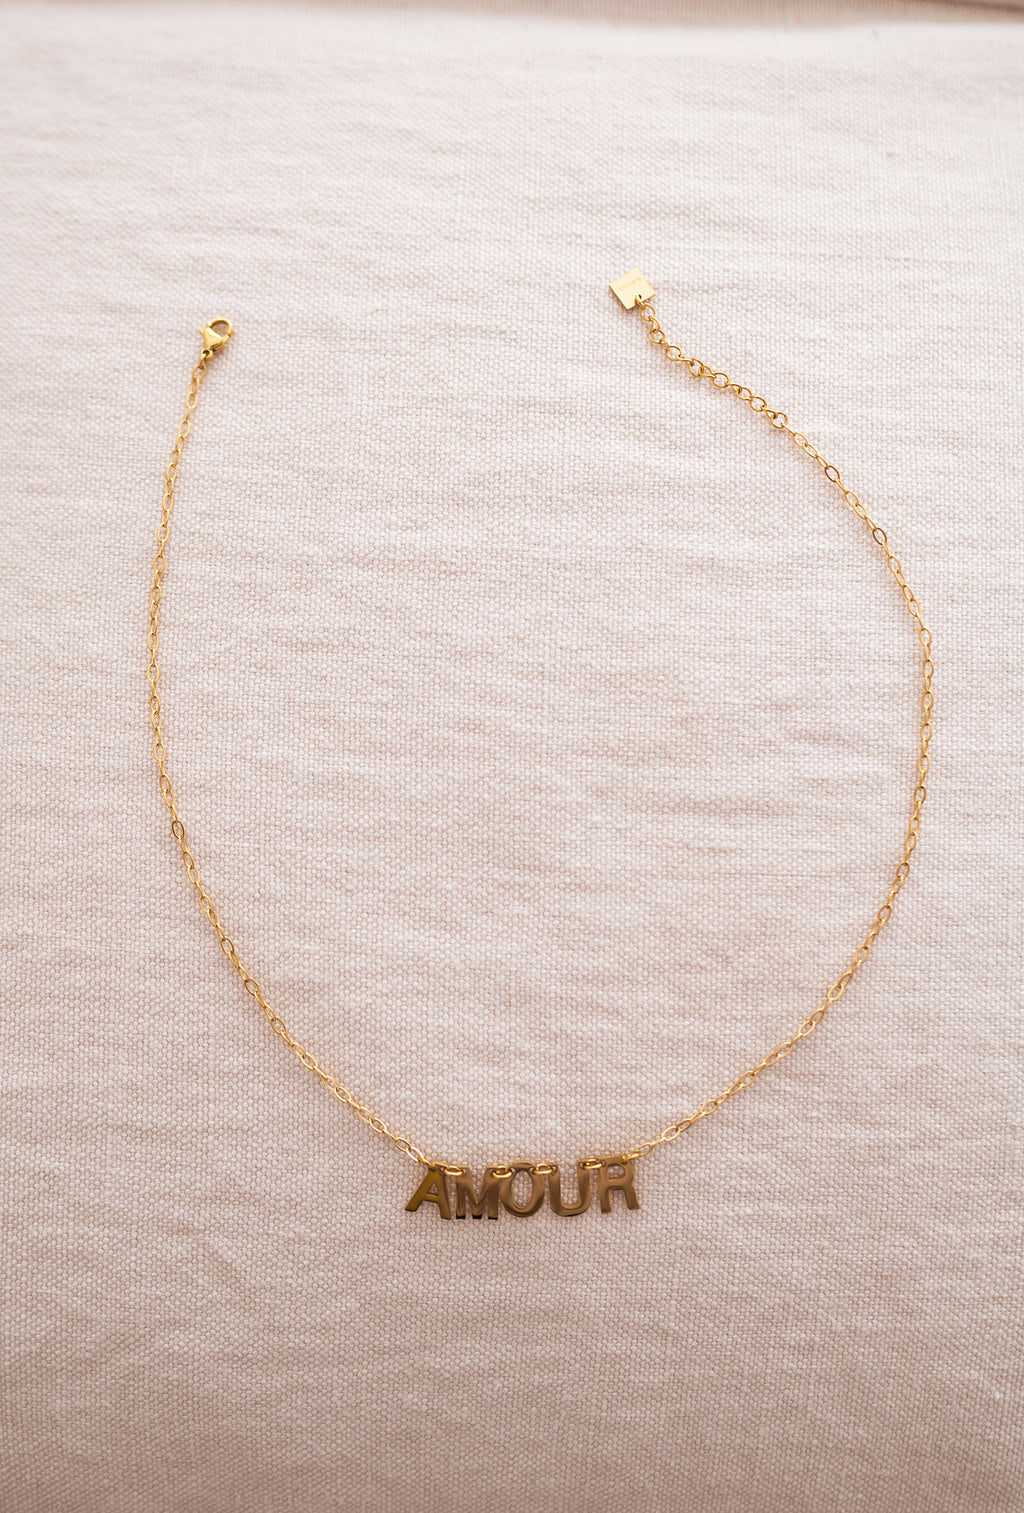 Maxi amour necklace